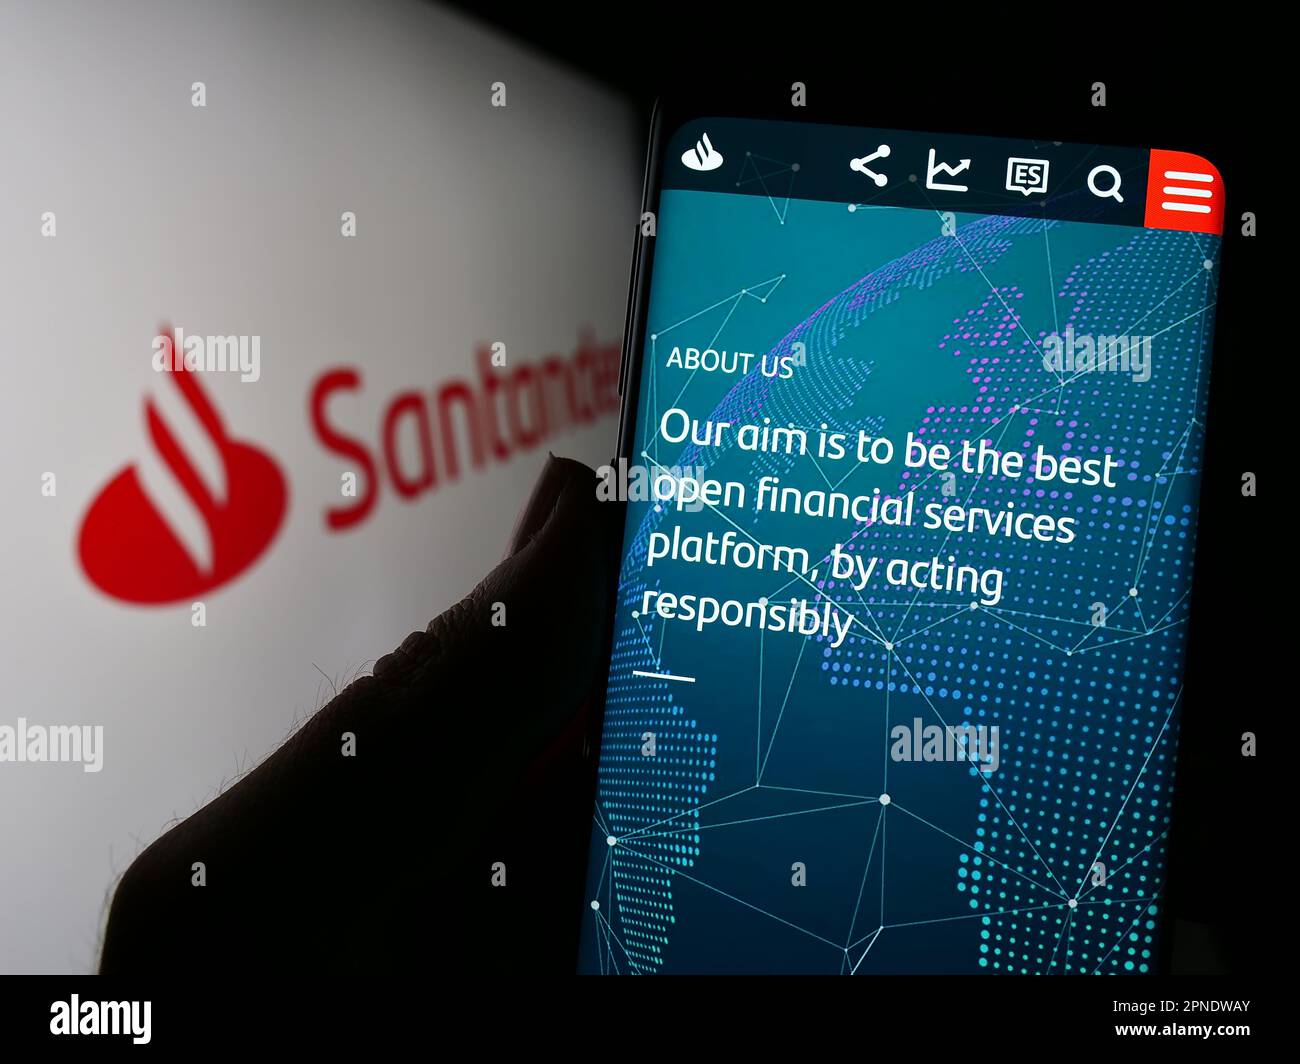 Person holding cellphone with webpage of Spanish banking company Banco Santander SA on screen in front of logo. Focus on center of phone display. Stock Photo